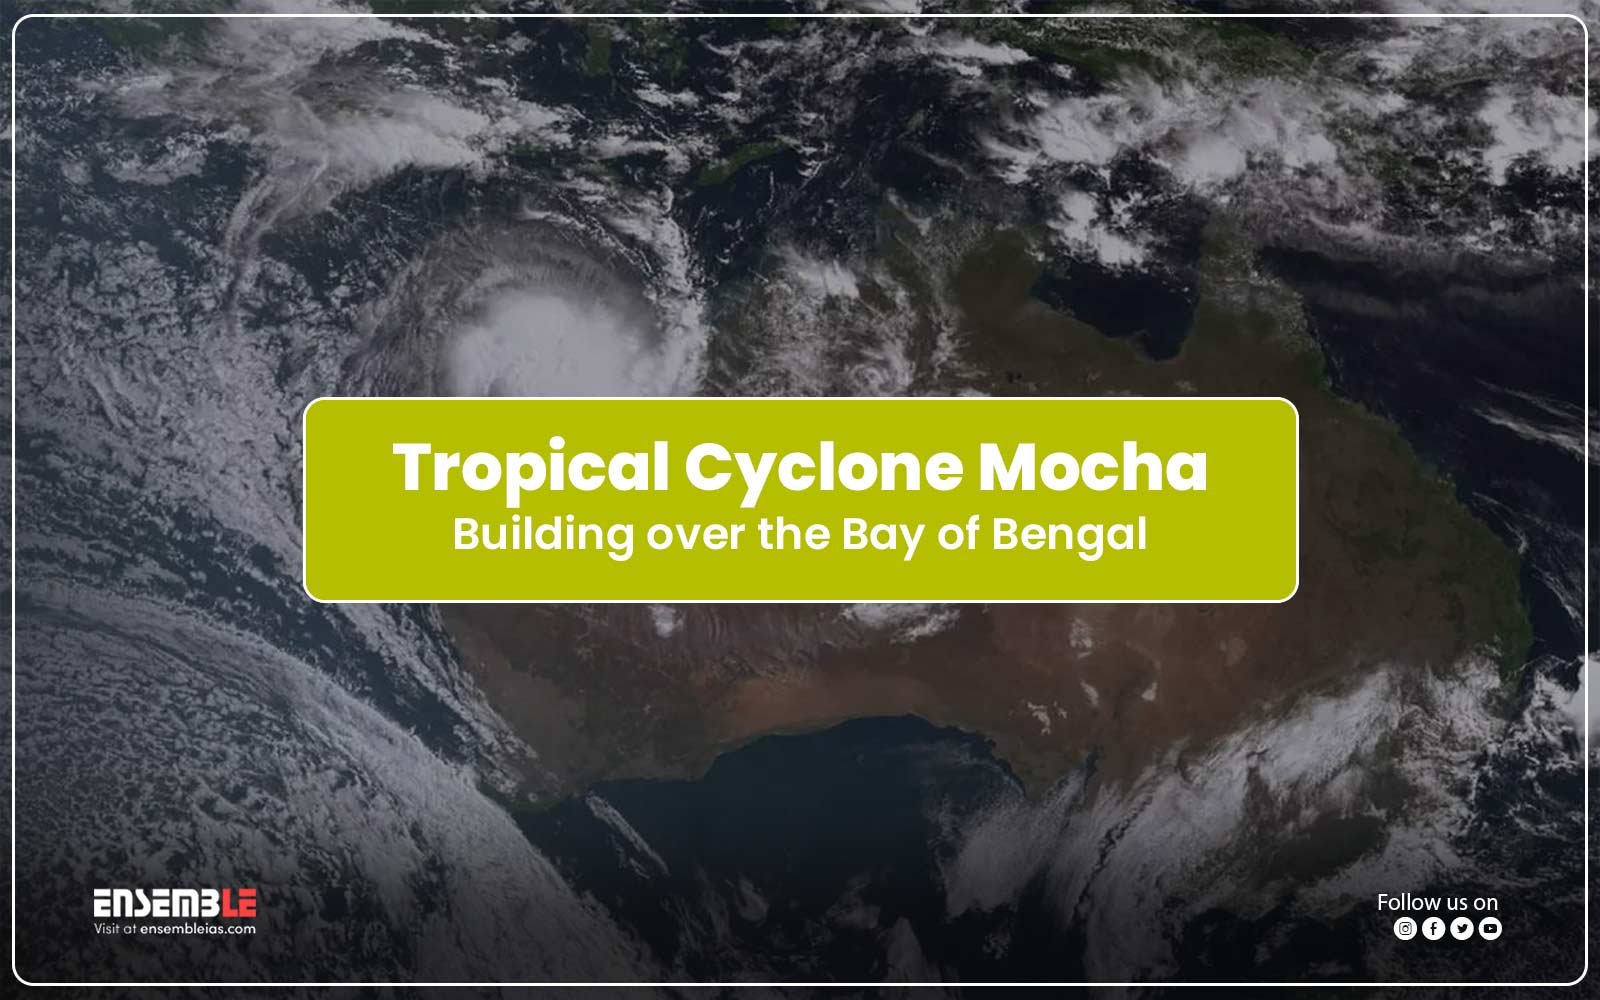 Tropical Cyclone Mocha building over the Bay of Bengal